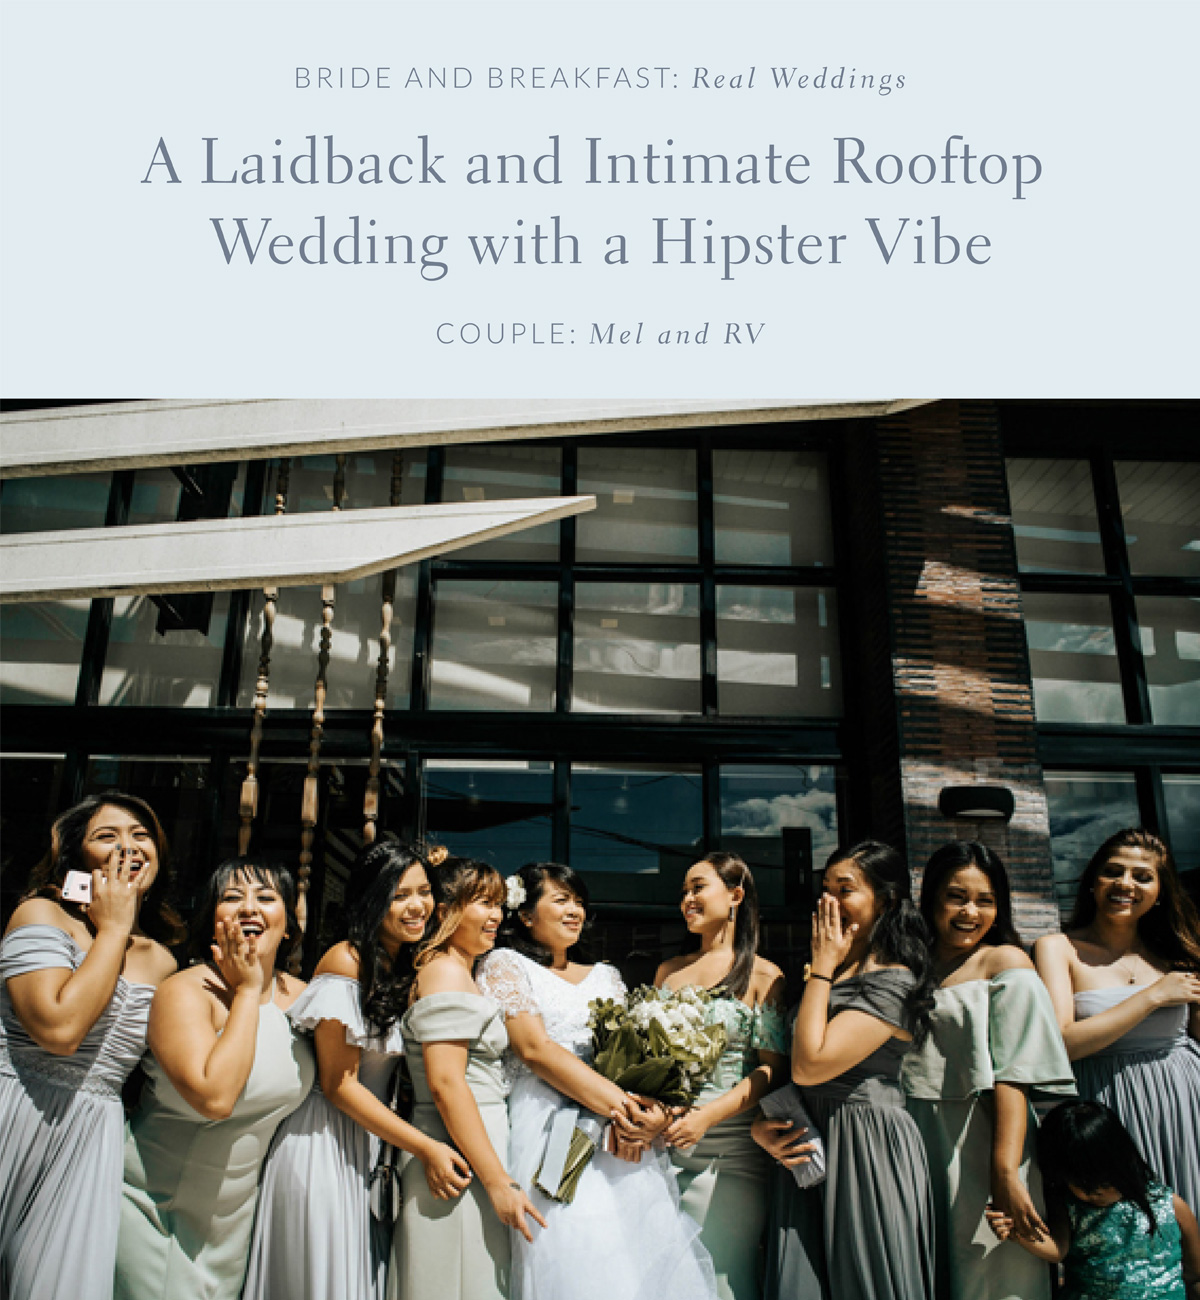 A Laidback and Intimate Rooftop Wedding with A Hipster Vibe